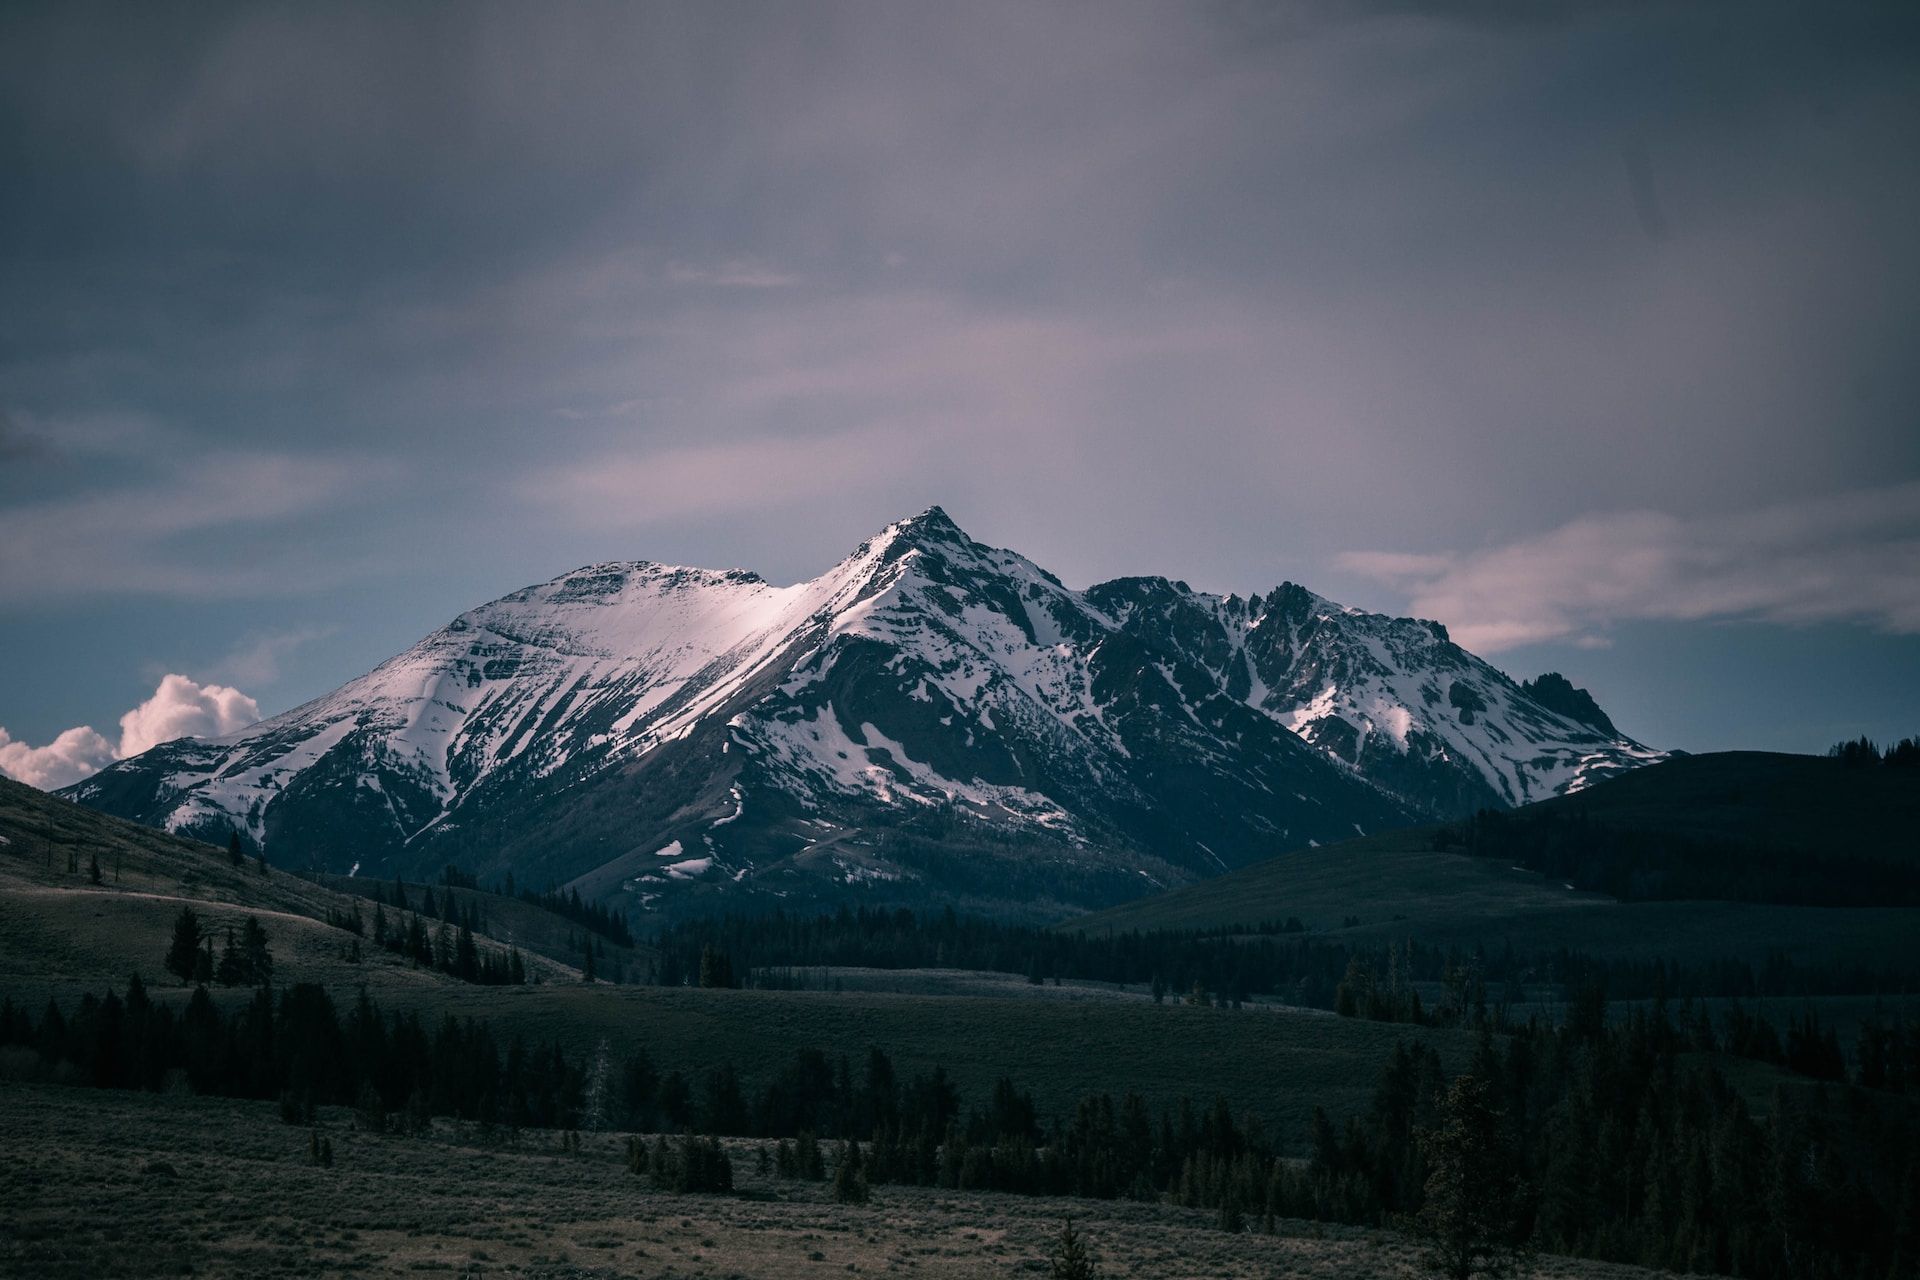 View of Yellowstone National Park's snow-capped mountain ranges